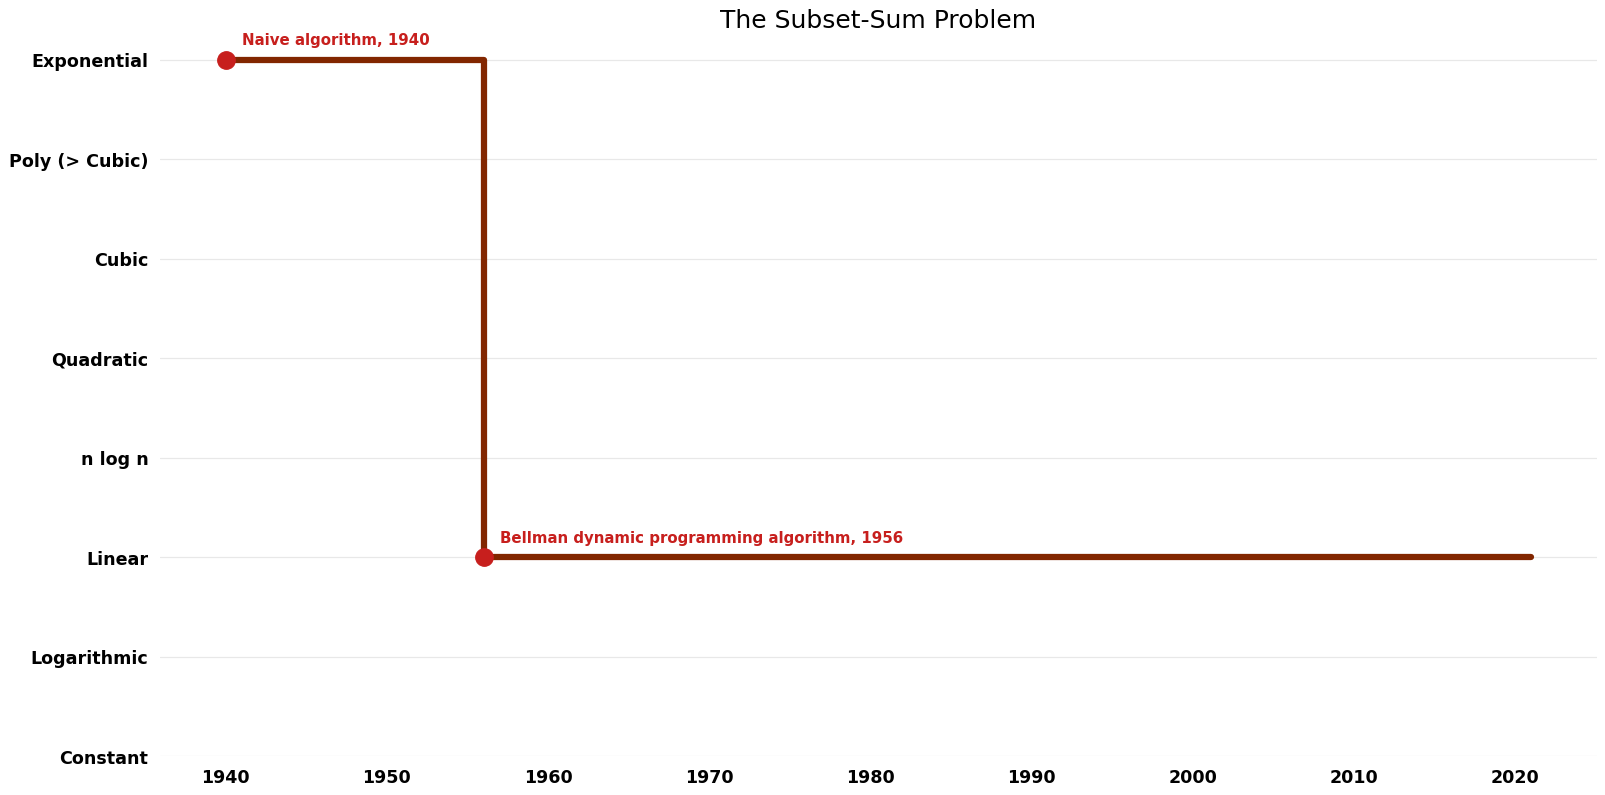 File:The Subset-Sum Problem - Time.png